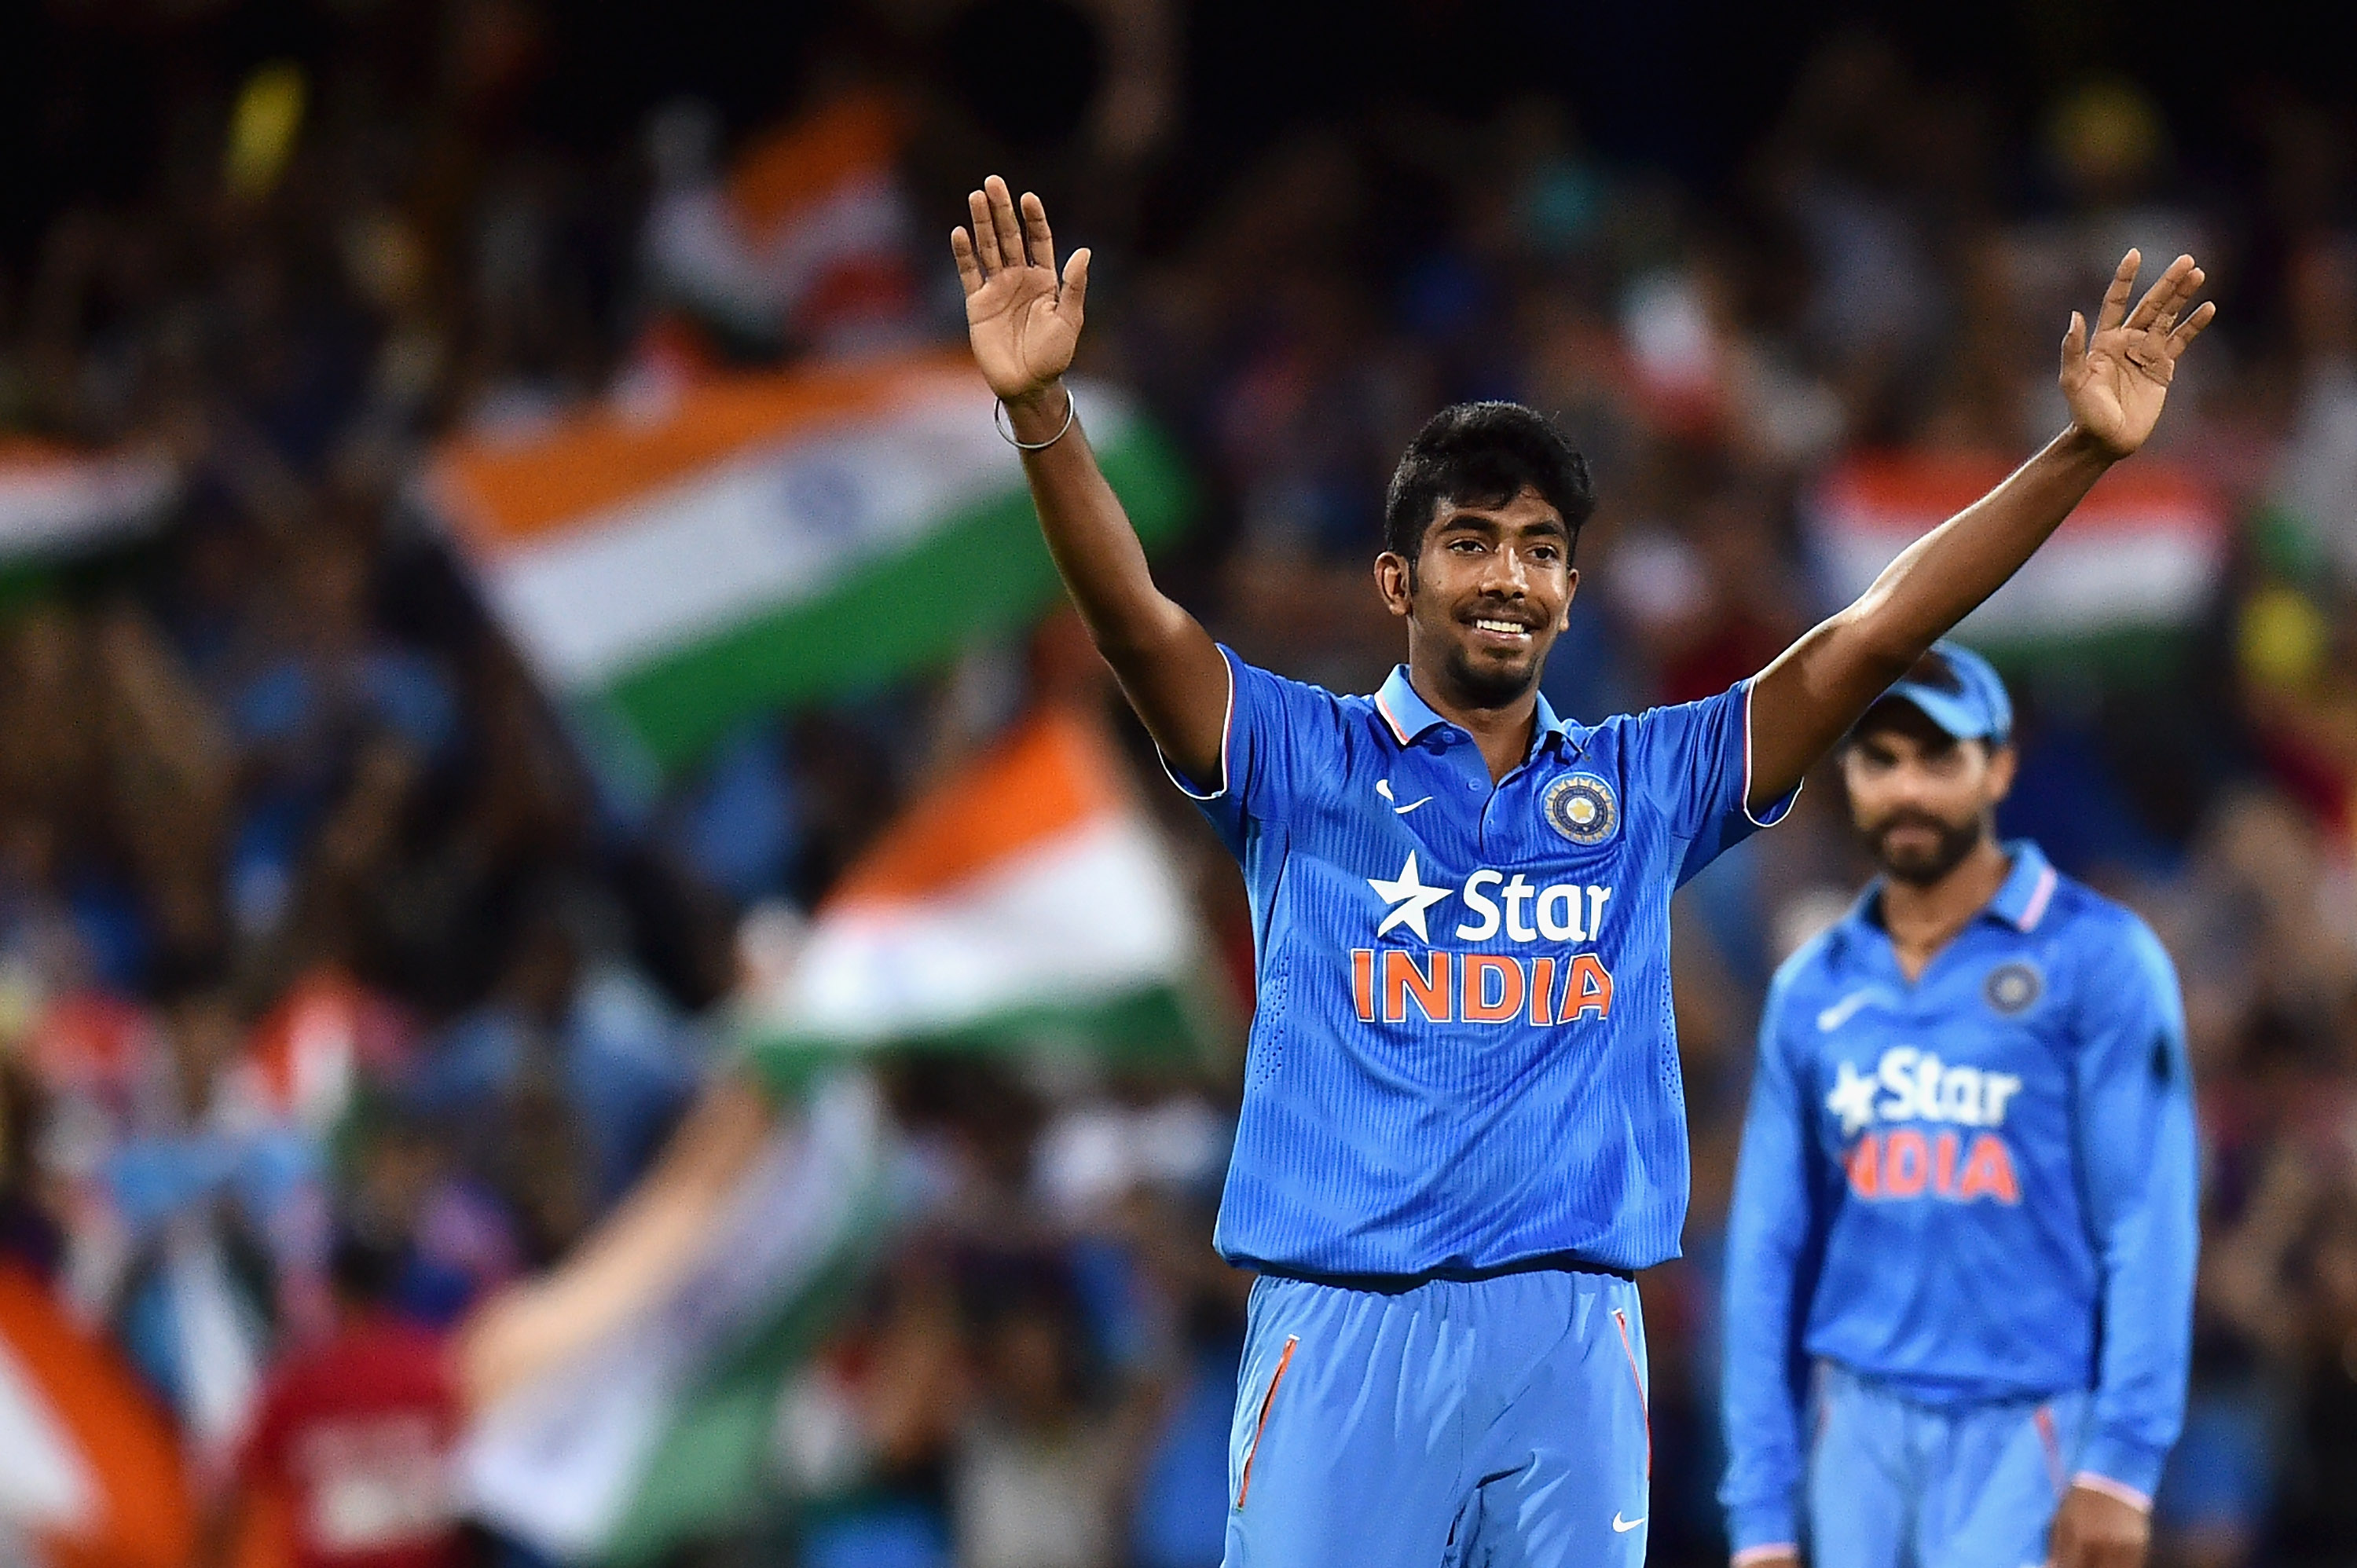 Difficult for Jasprit Bumrah to hold his body up with short run-up, opines Michael Holding